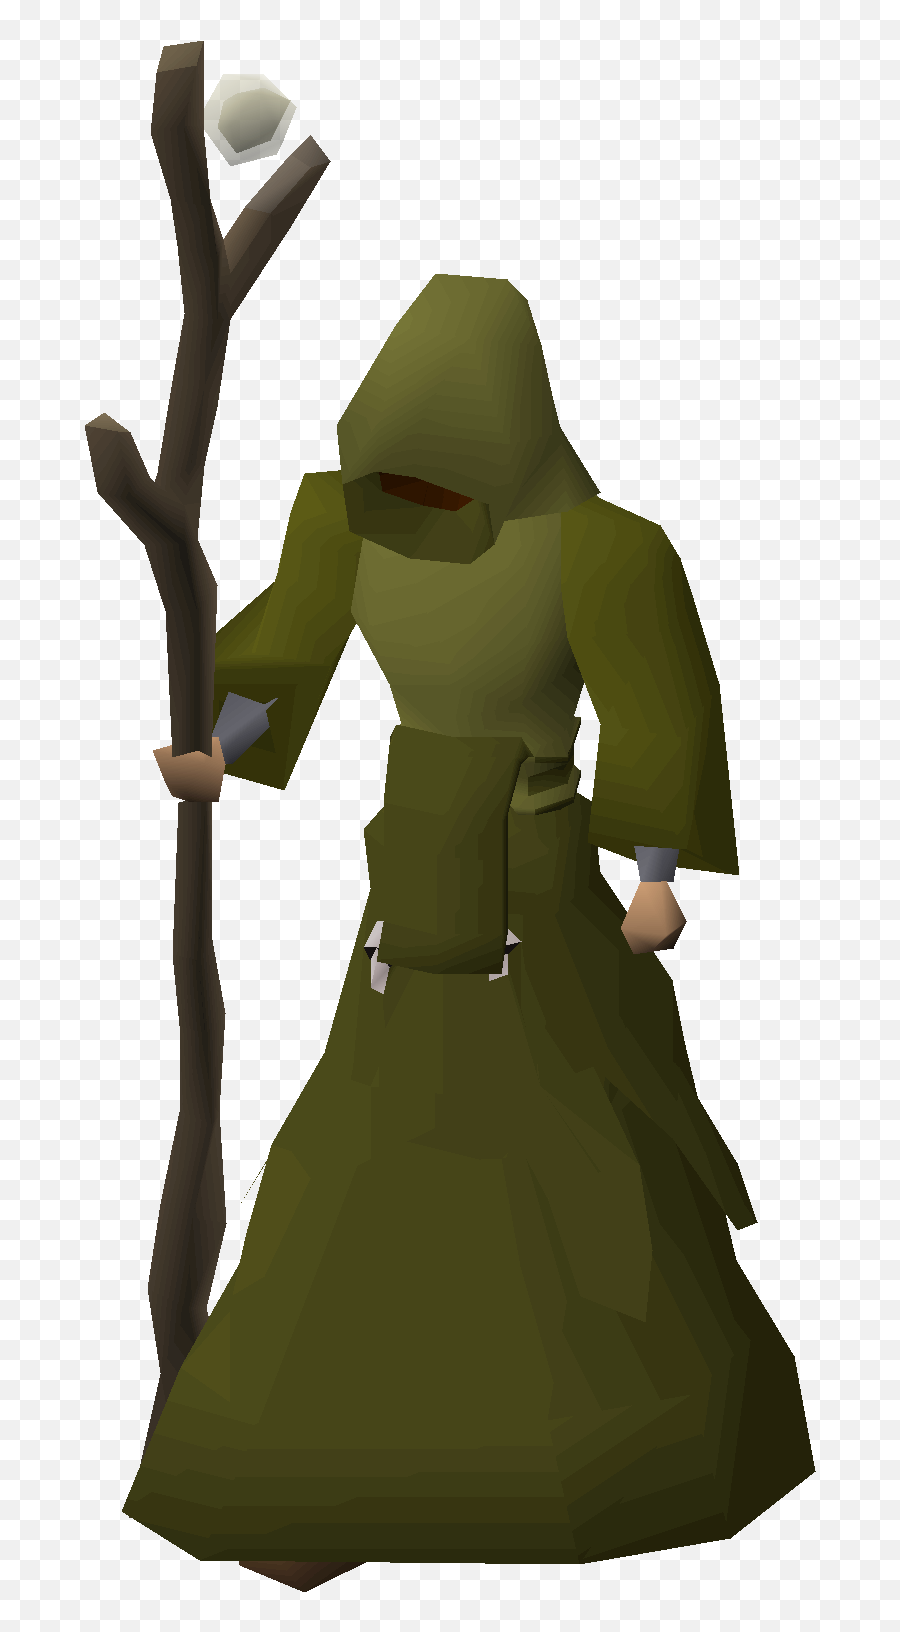 Air wizard - OSRS Wiki